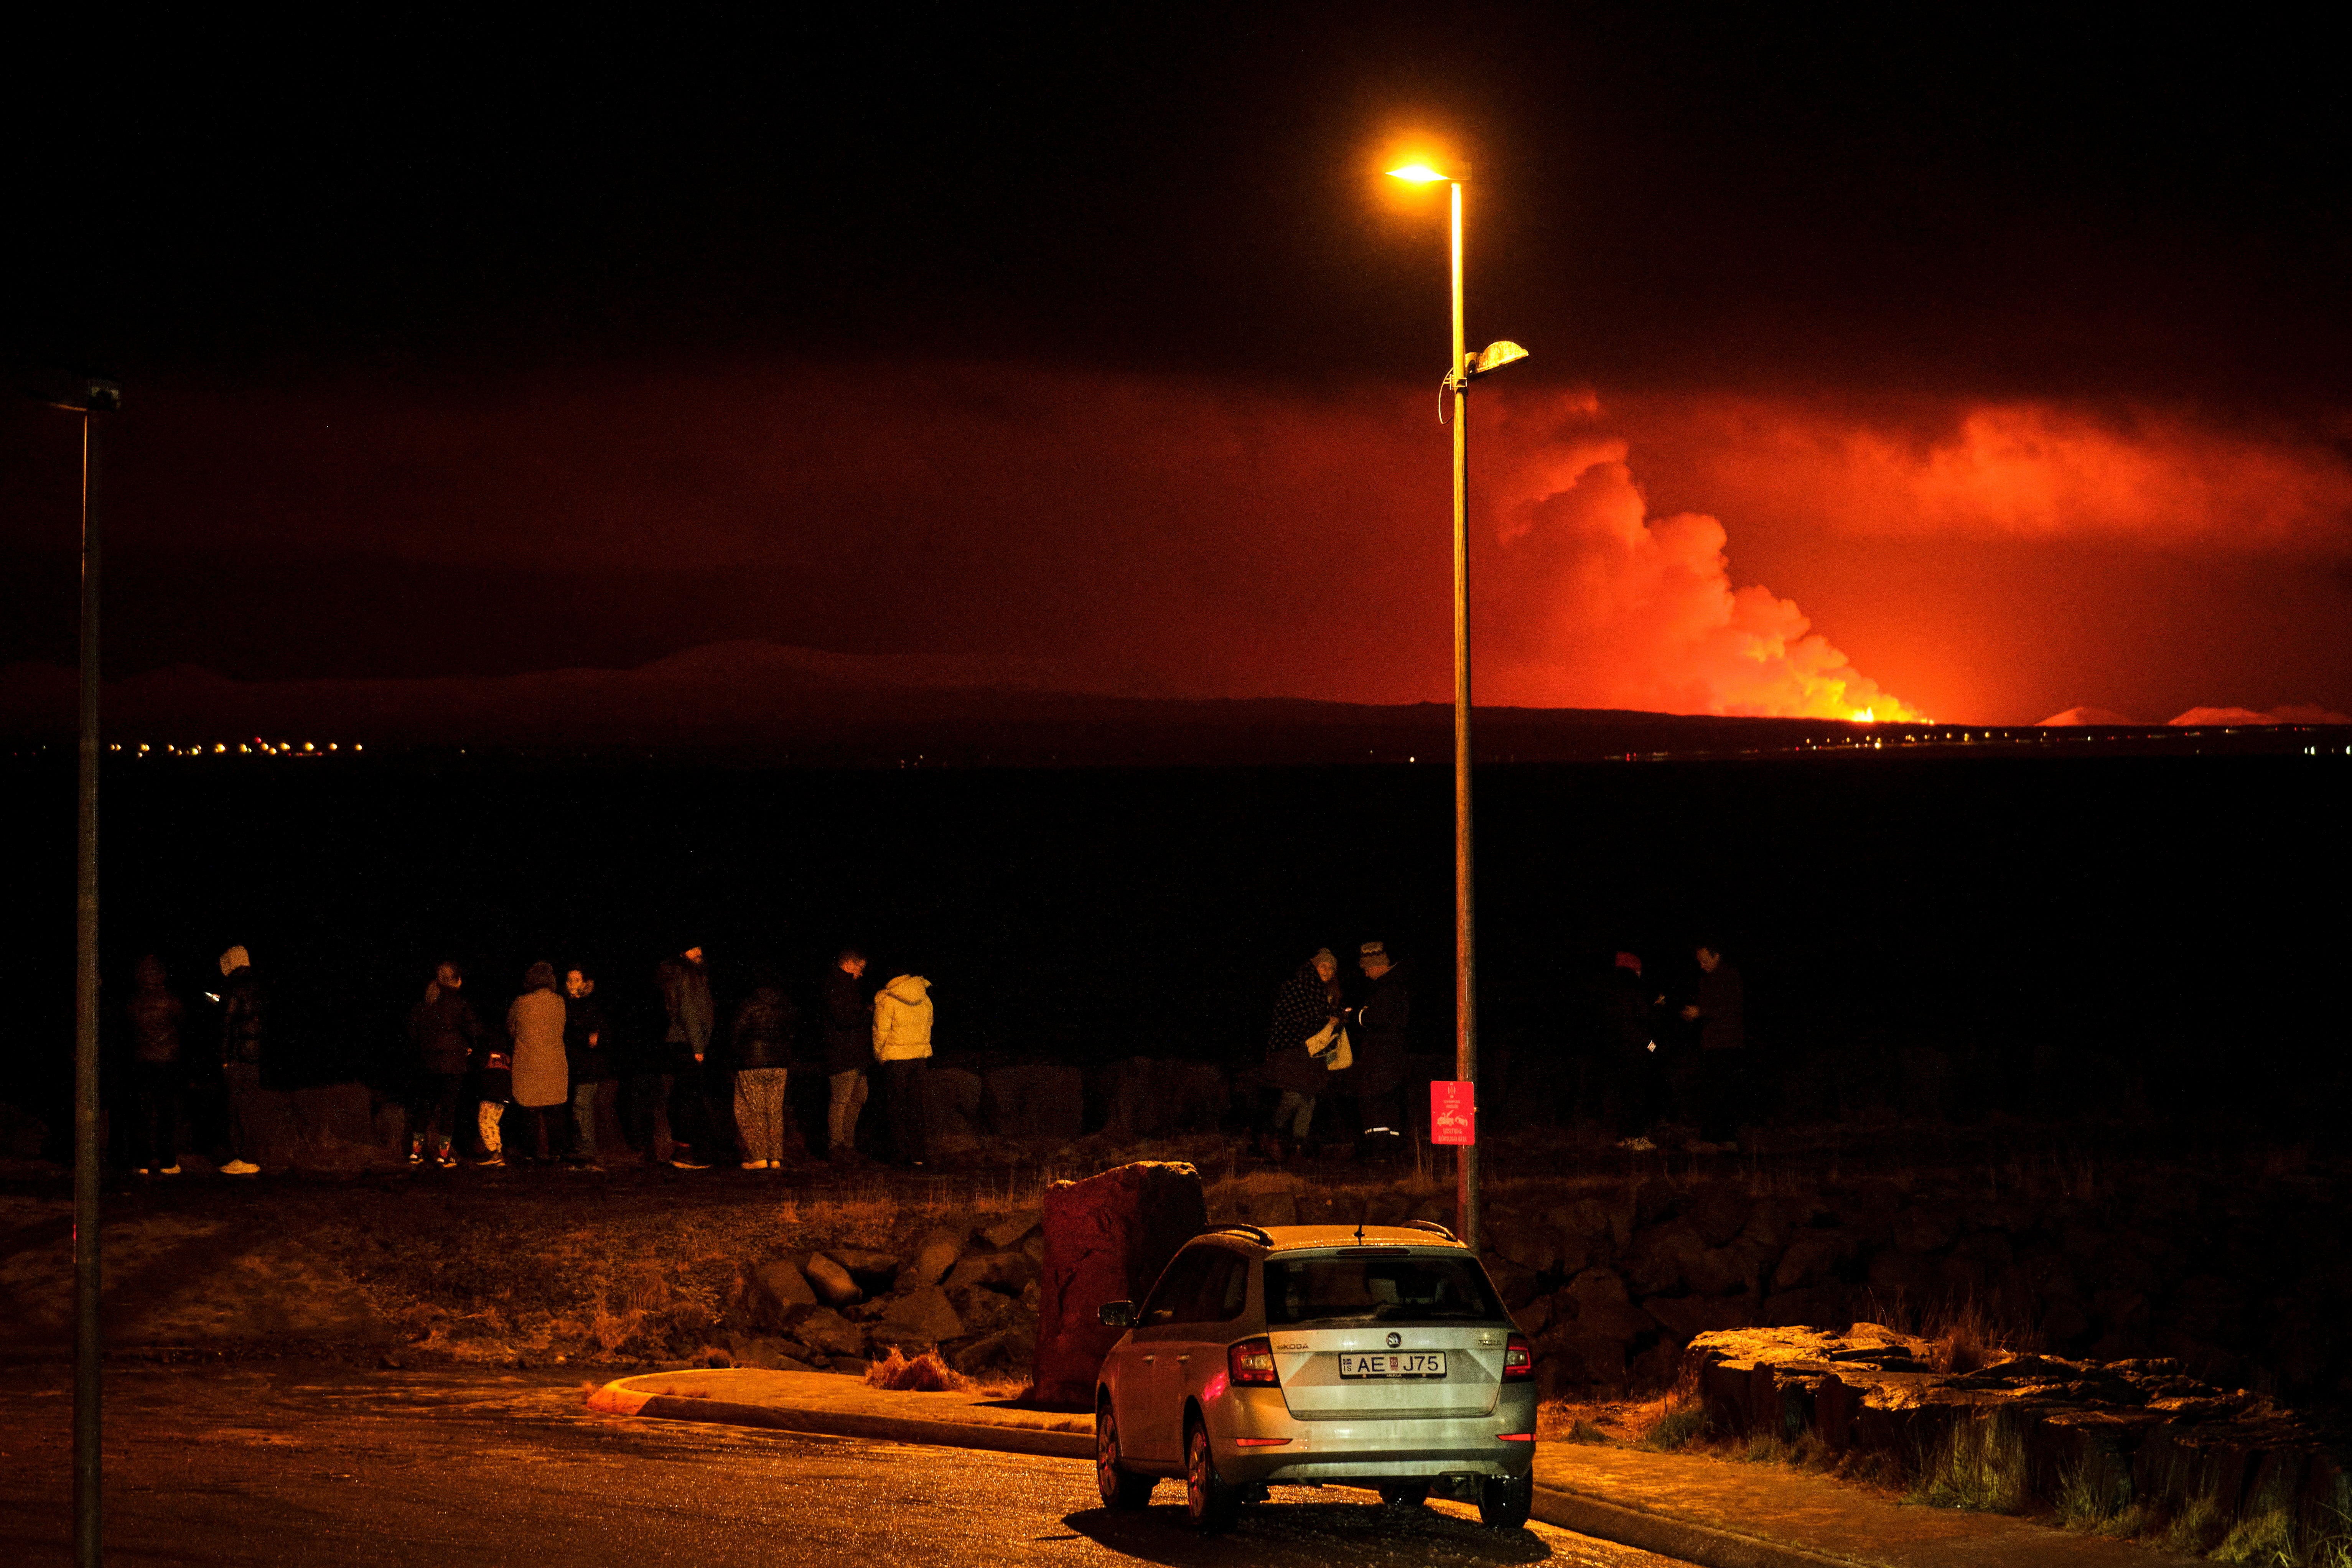 Thrill-seekers watch the gas plumes and lava from a distance in Iceland